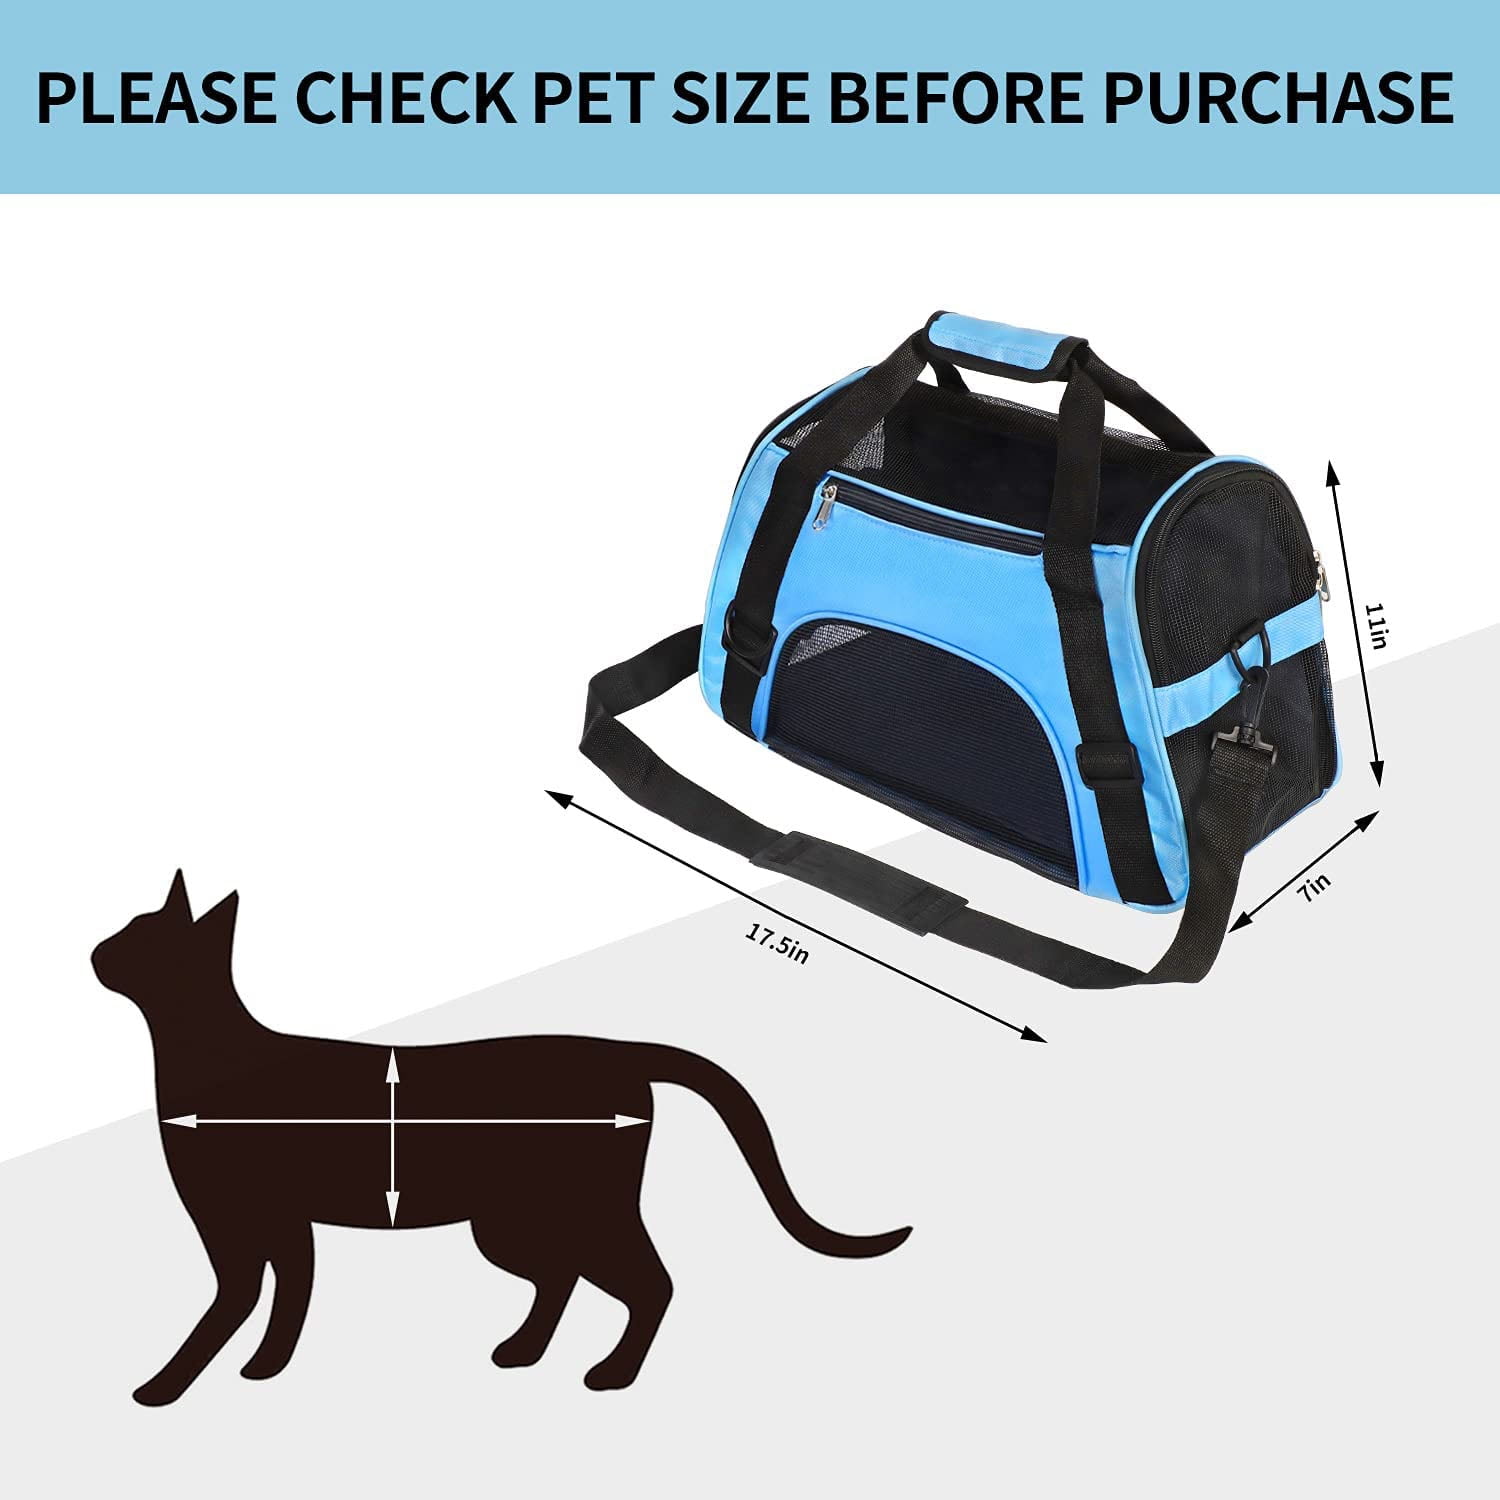 perfrom Pet Carrier Soft Cat Carrier Airline Approved Soft Side Pet Carrier for Cats Small Dogs Travel Carrying Handbag Breathable 4-Windows Design 20.5 x 9.7 x 13 